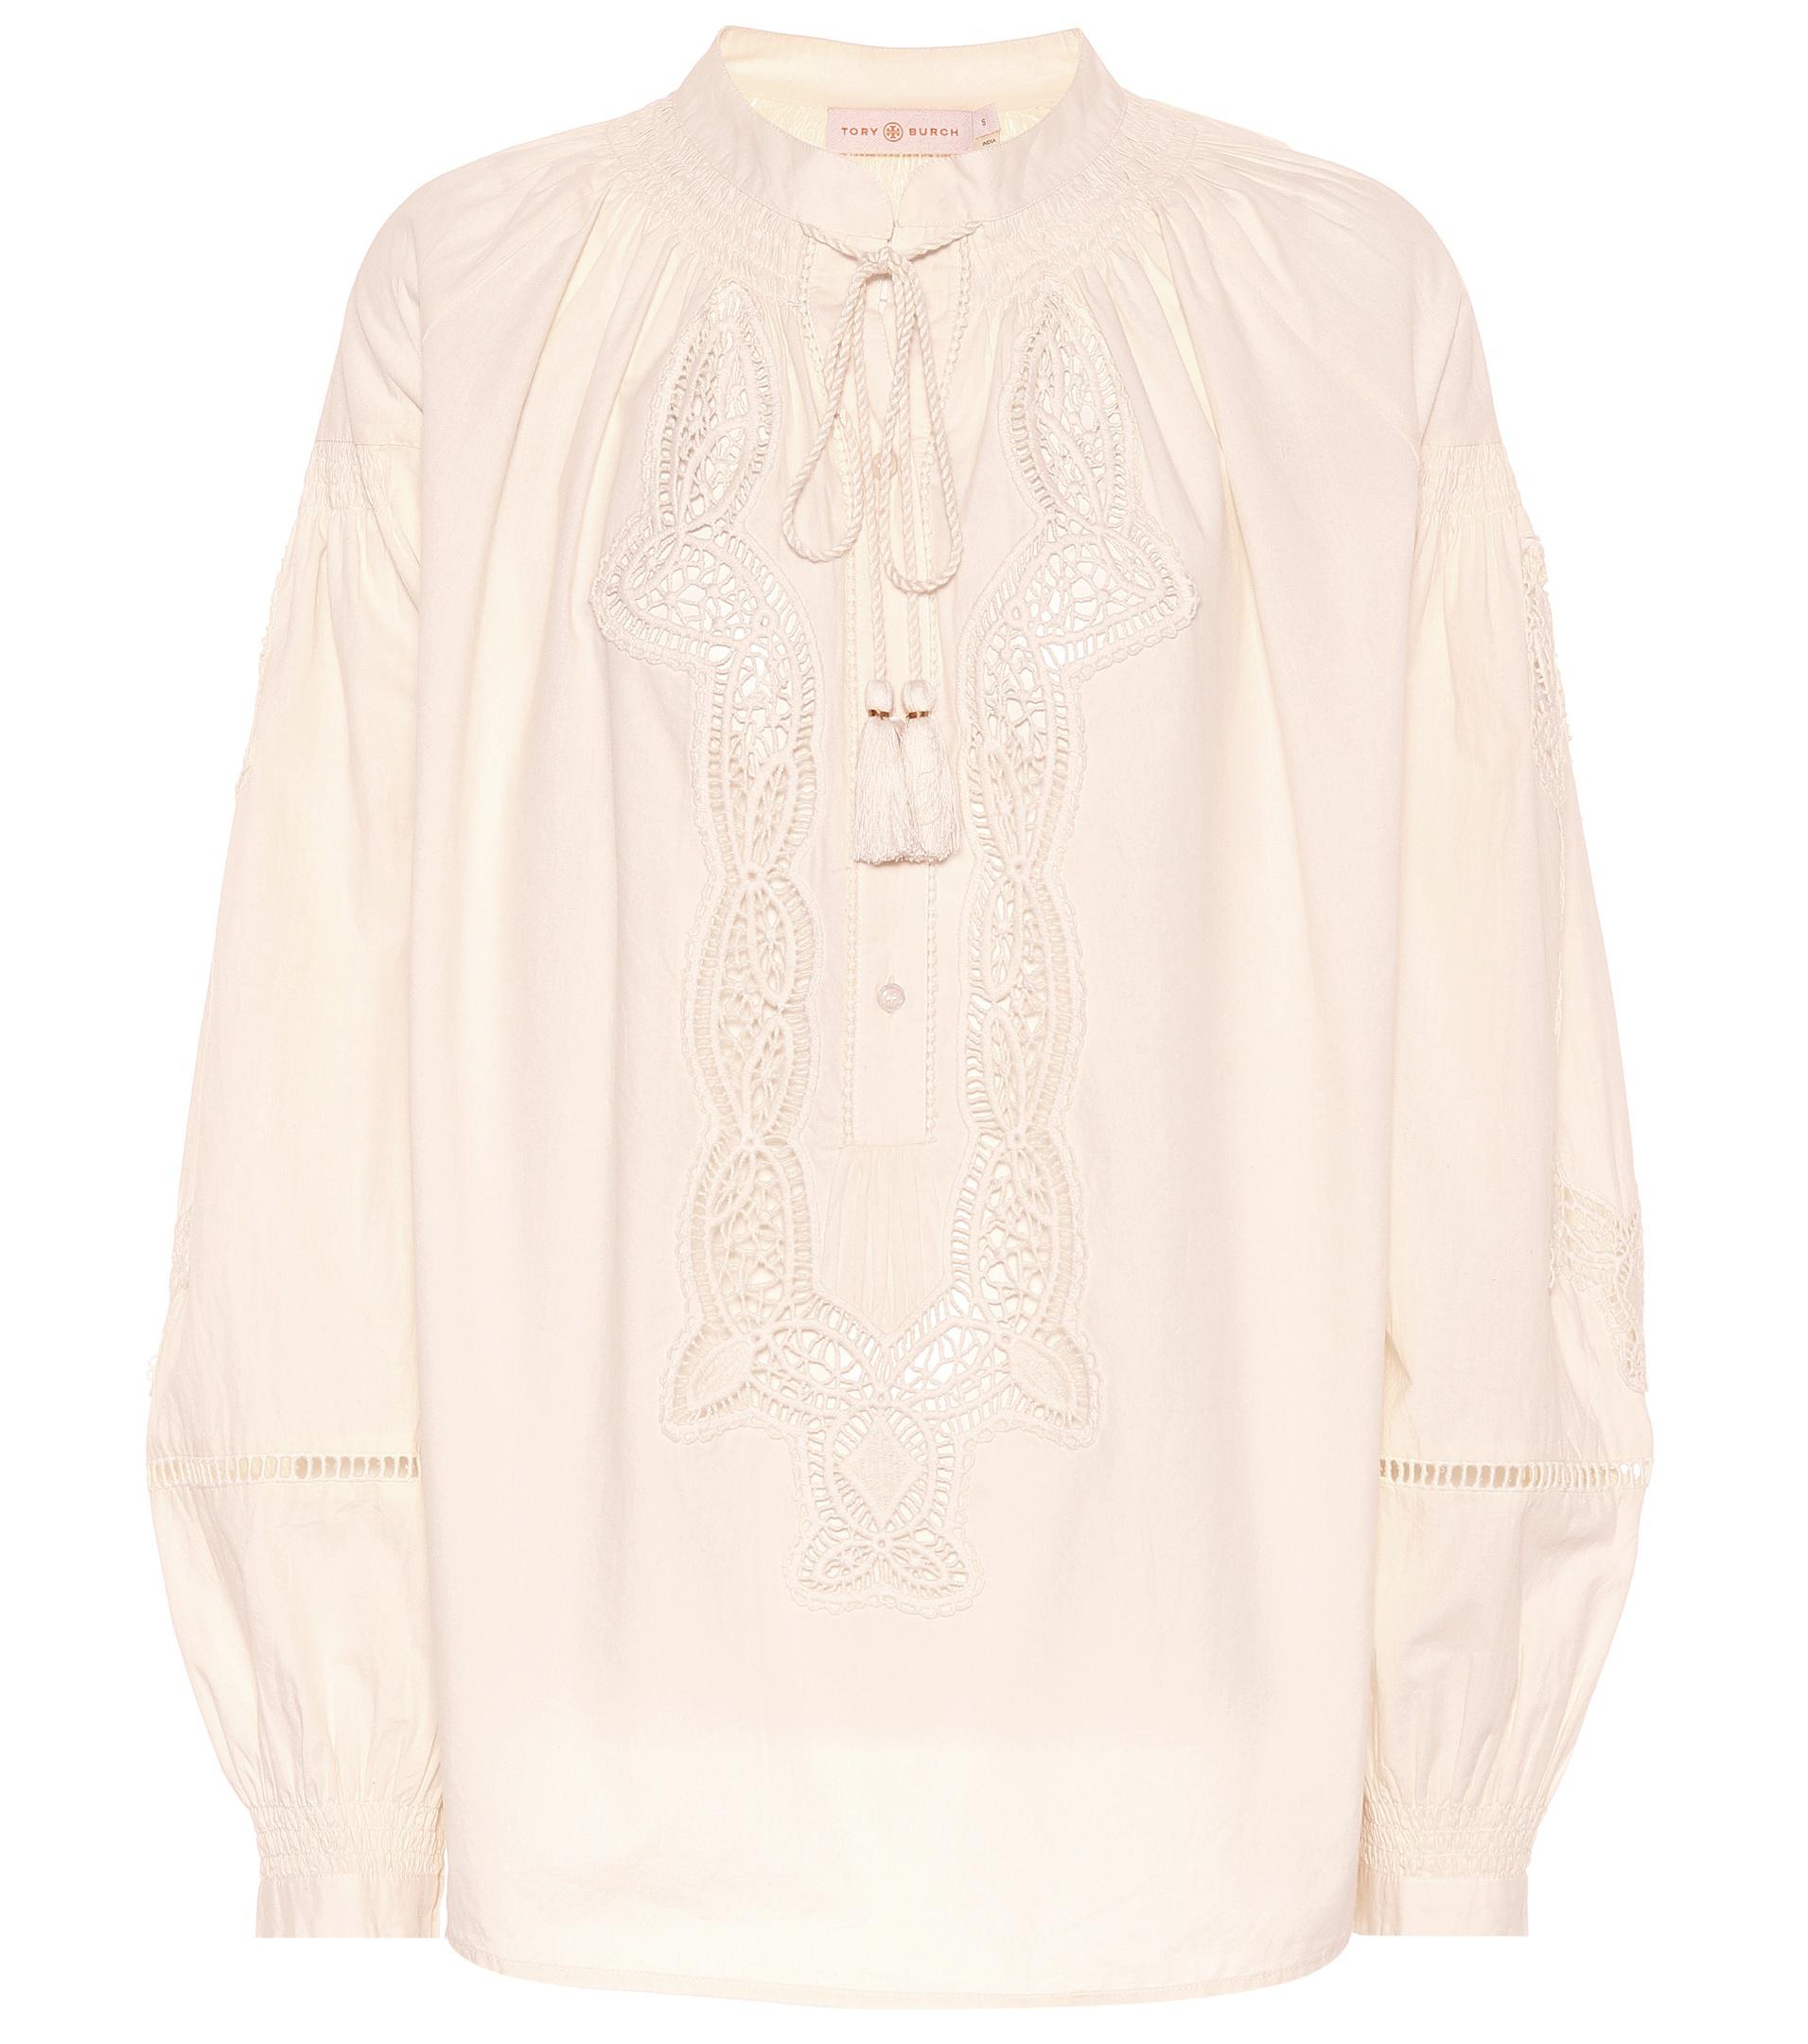 Tory Burch Kimberly Cotton Blouse in White - Lyst